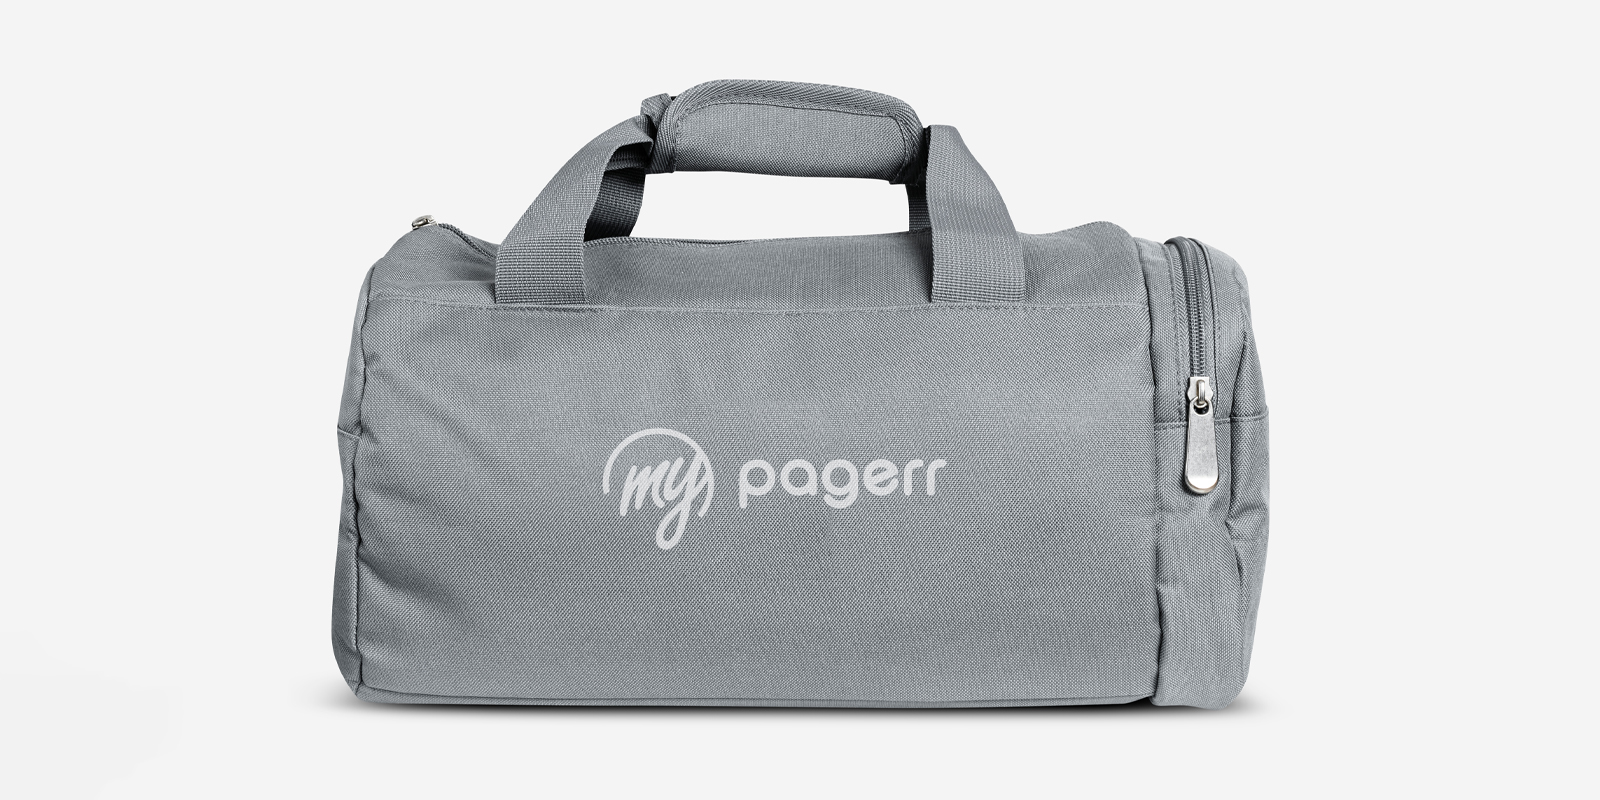 Duffel & gym bags in Valencia - Print with Pagerr